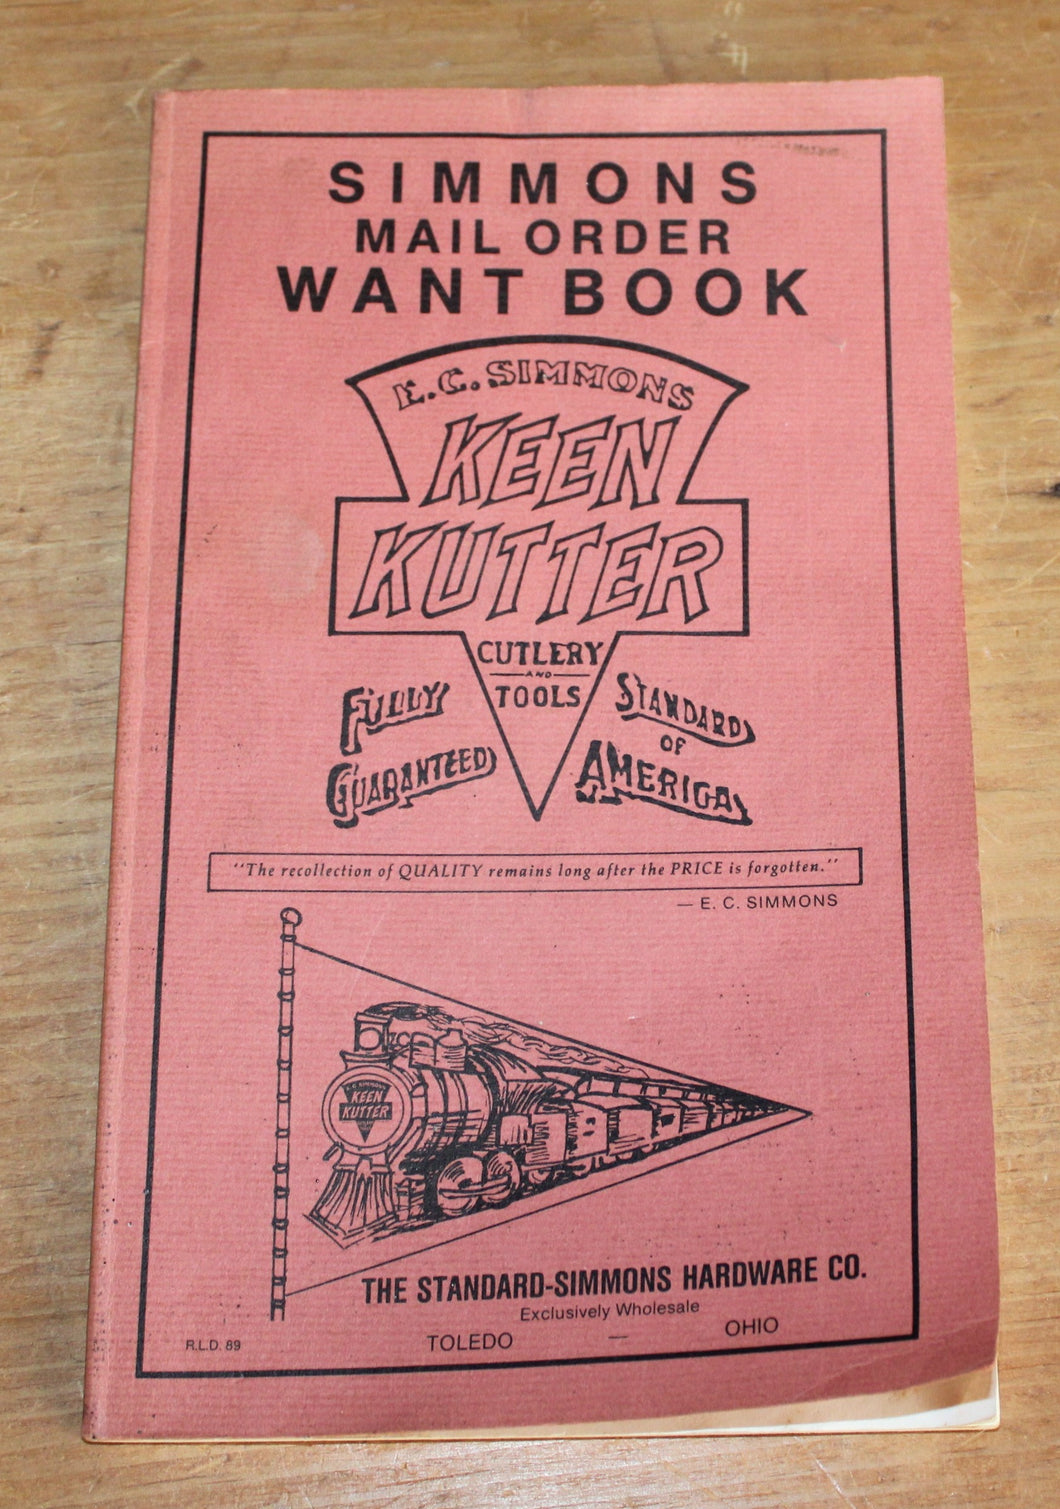 Vintage E.C. Simmons Keen Kutter Mail Order Want Book - Reprint